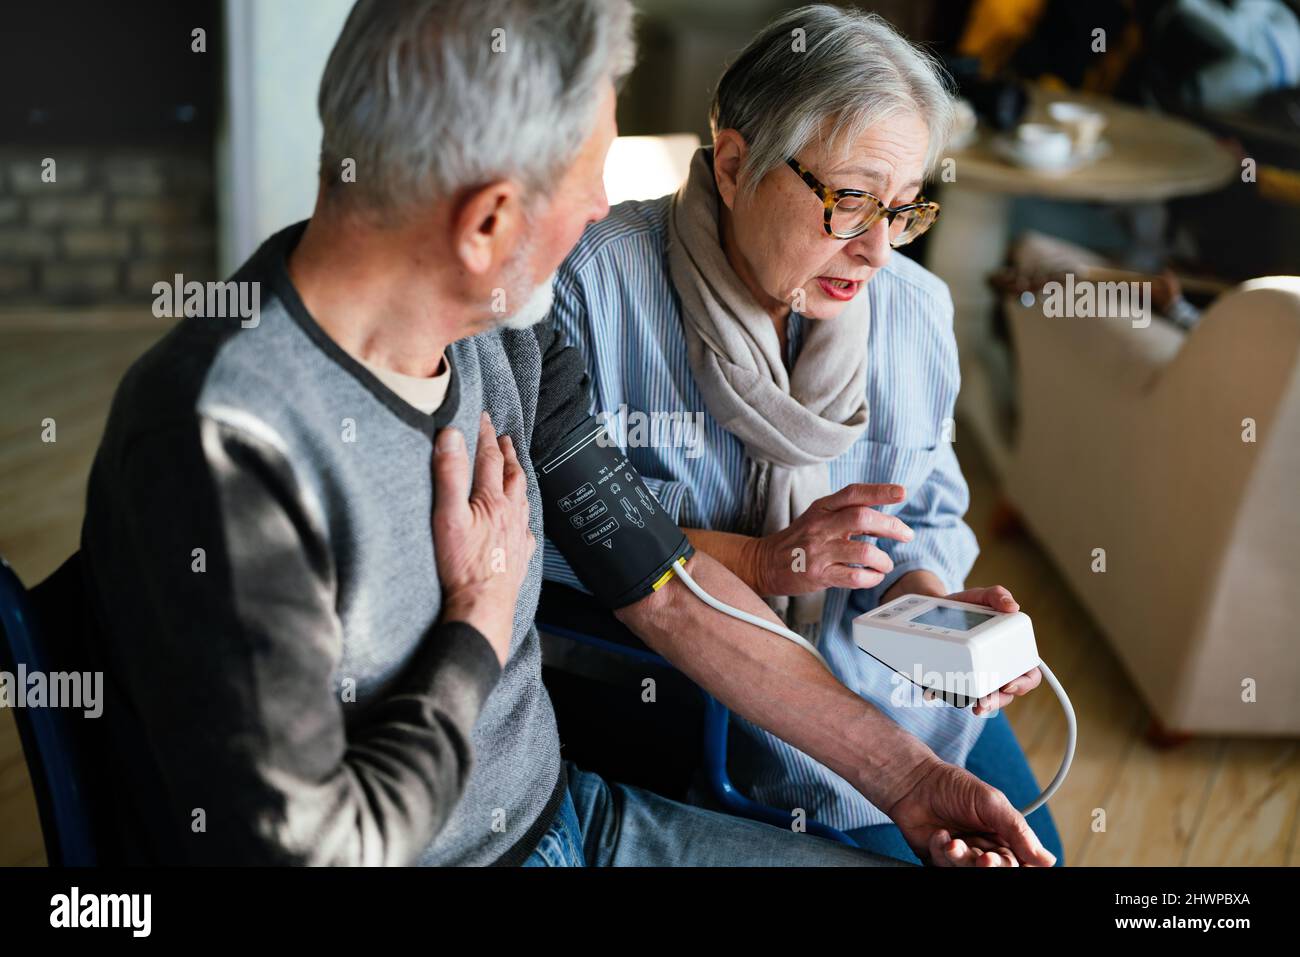 Senior couple at home measuring blood pressure. Home monitoring people healthcare concept Stock Photo